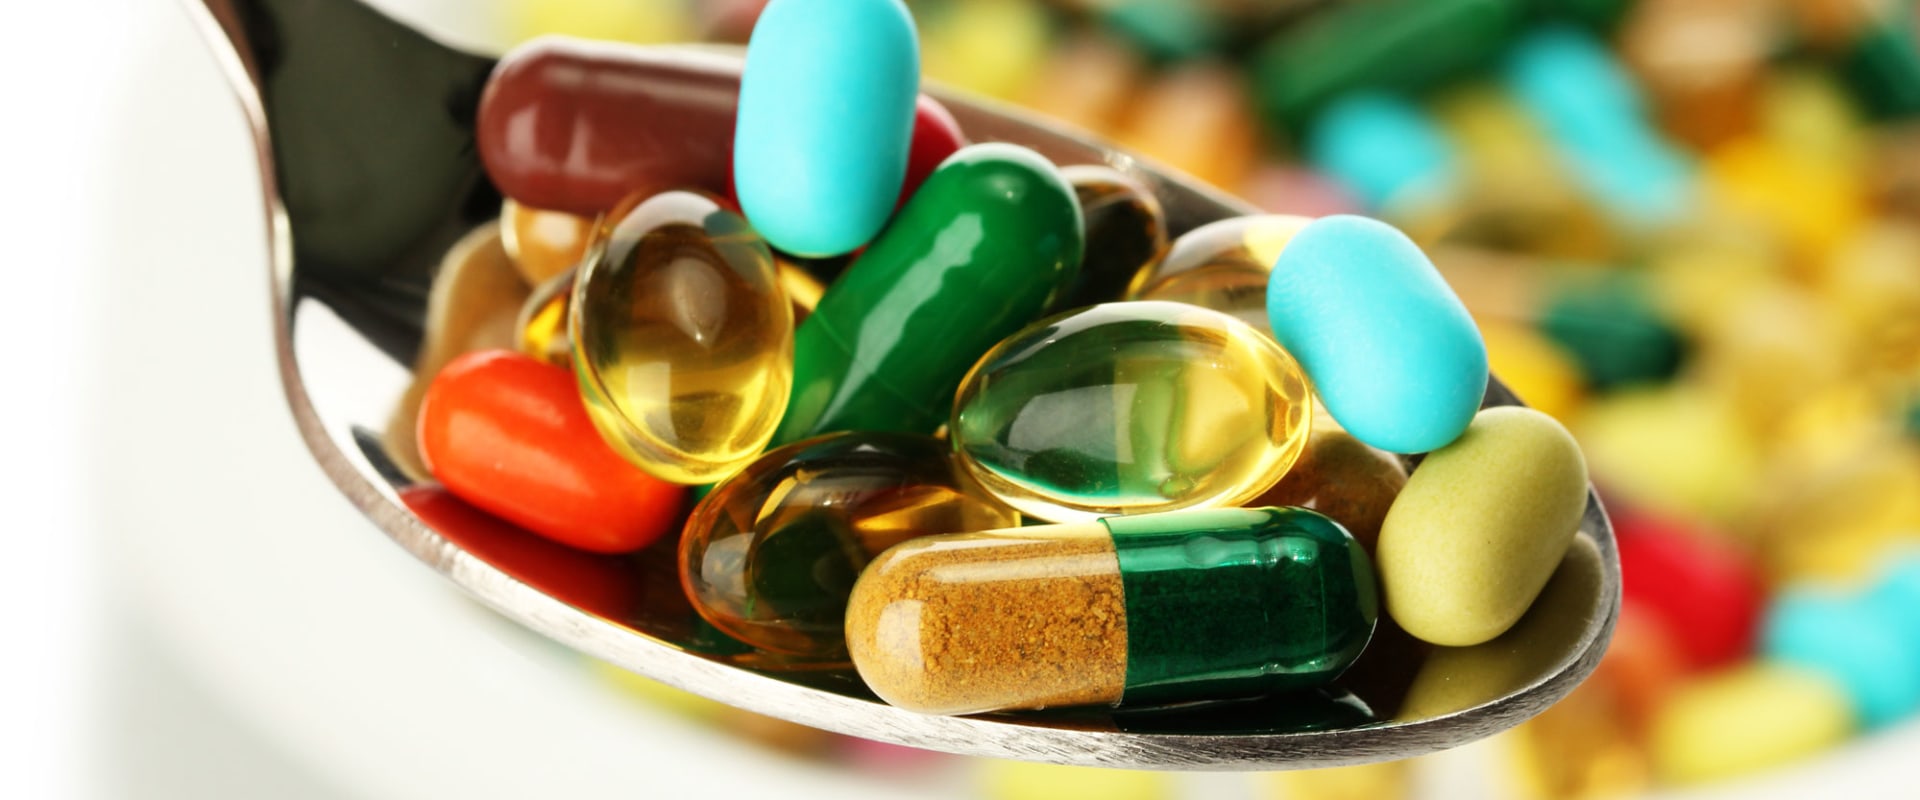 Are Food Supplements Necessary for a Healthy Diet?